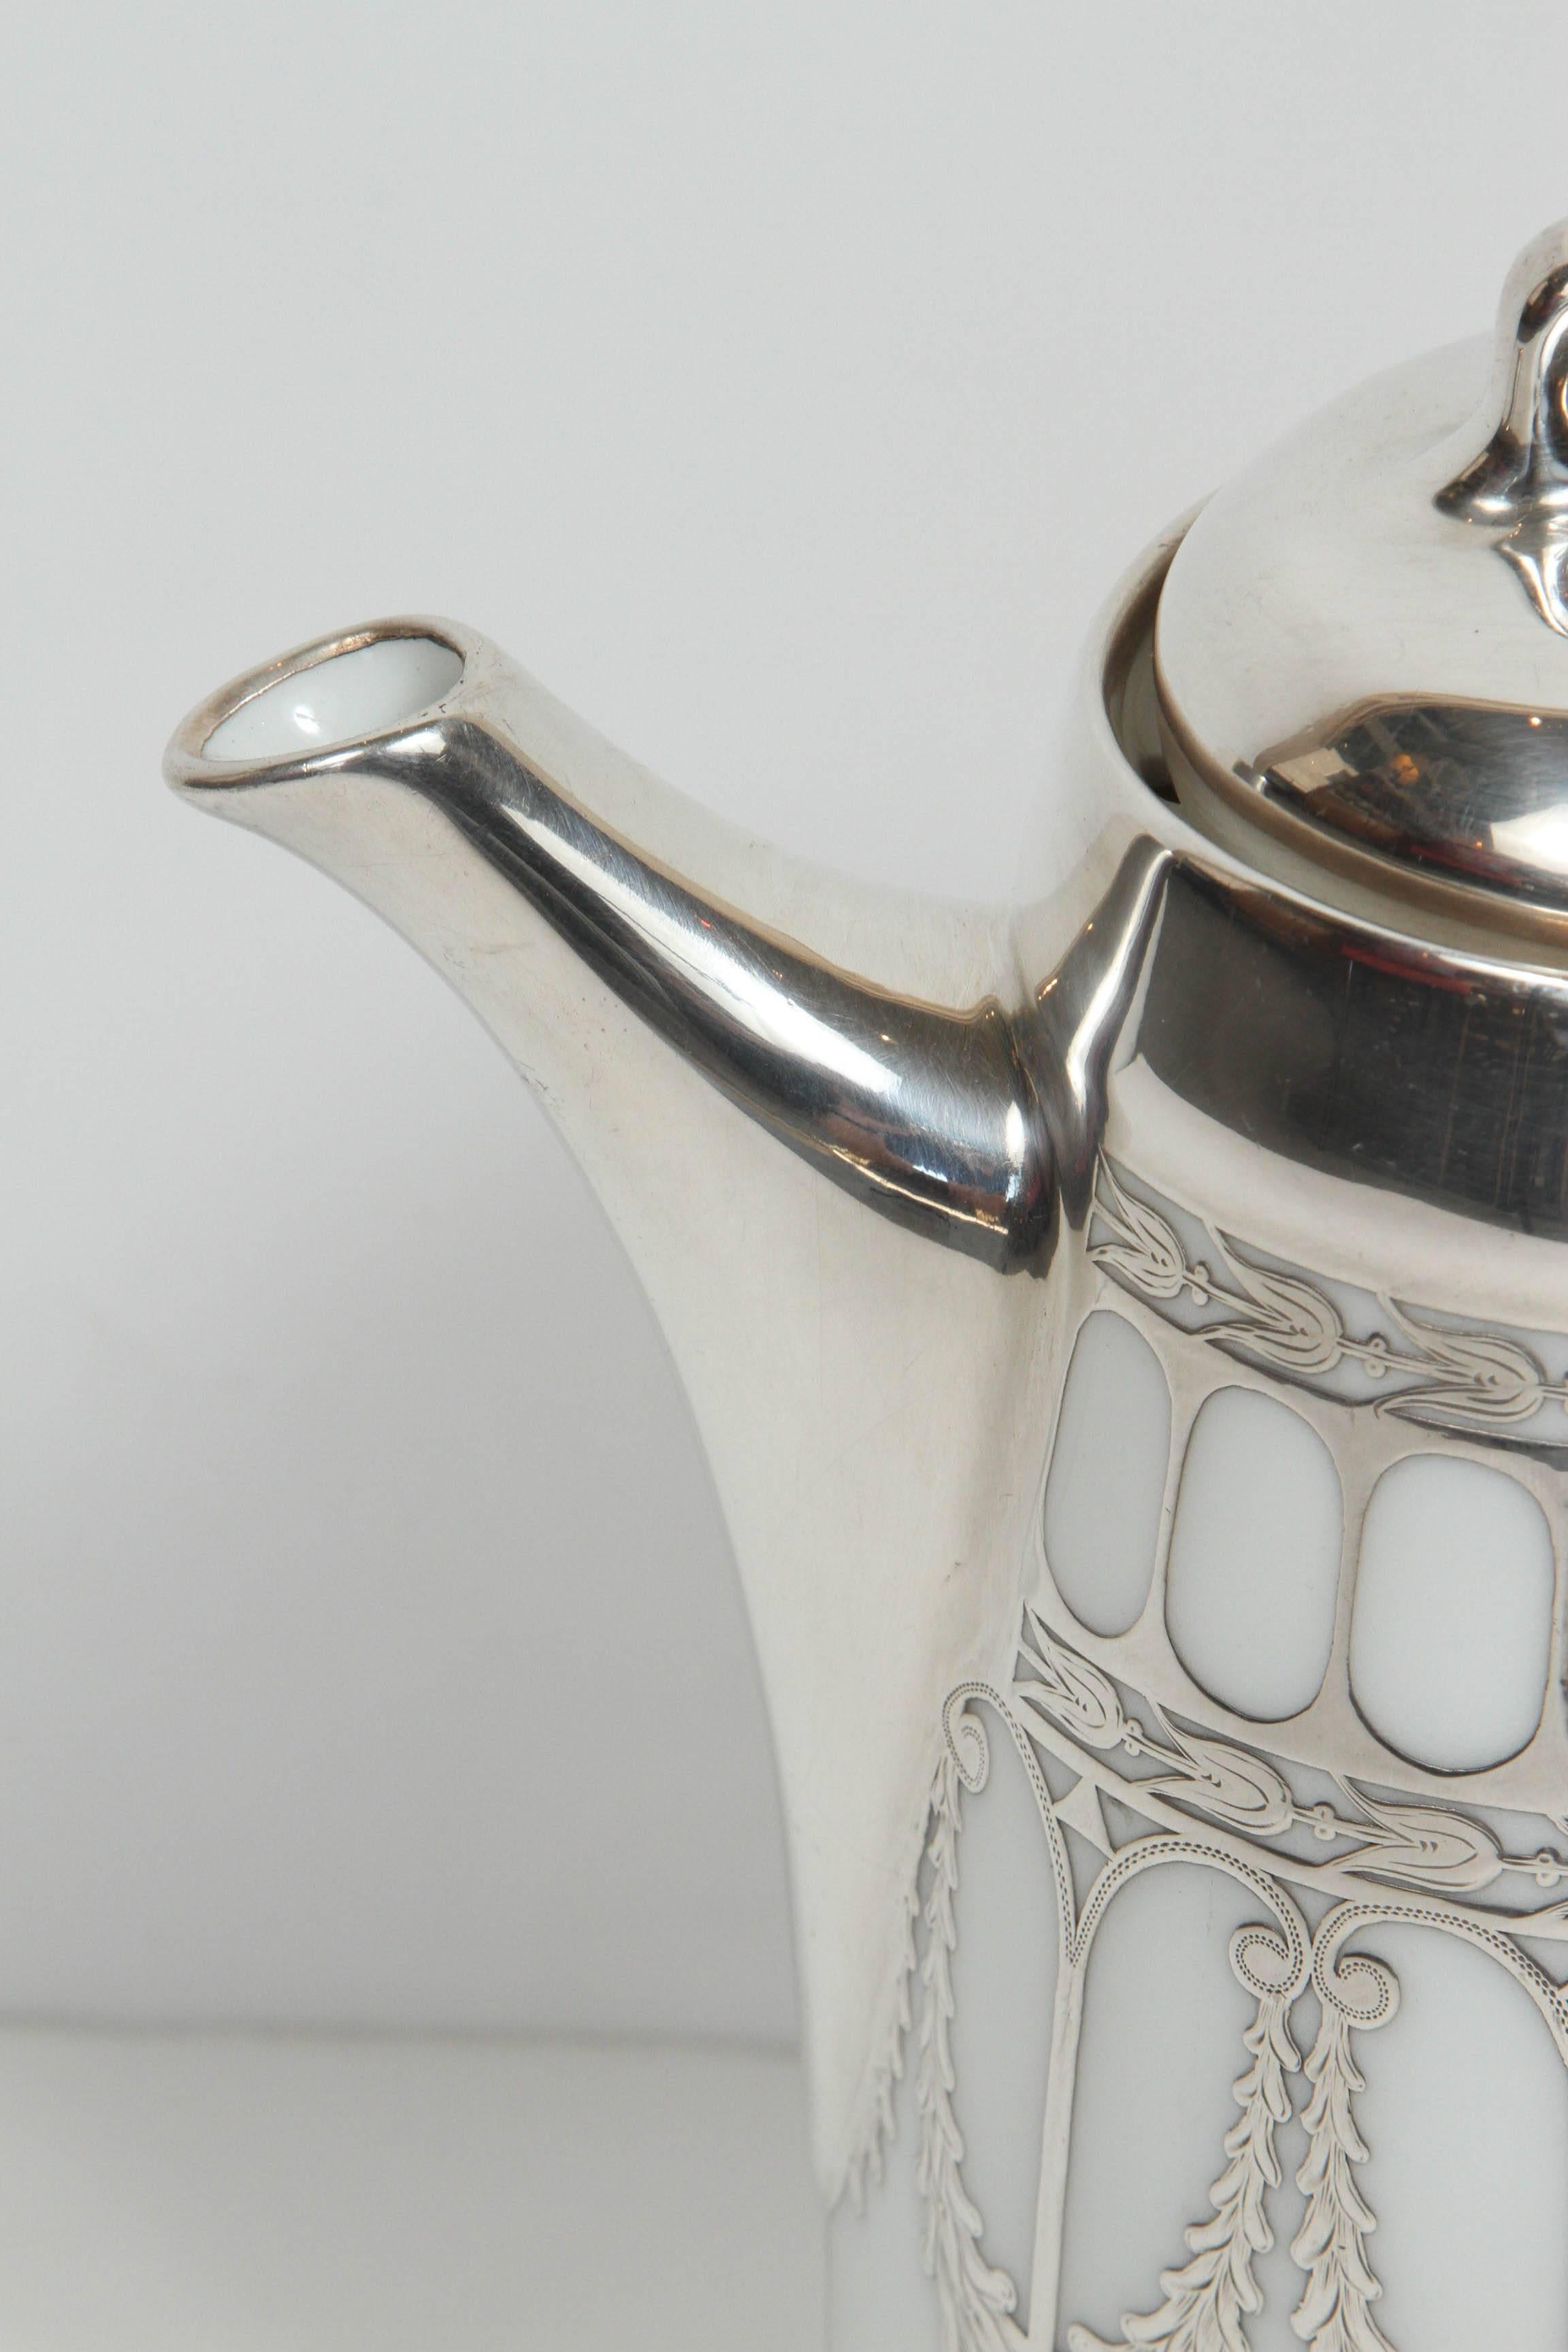 Early 20th Century Vintage Porcelain and Sterling Silver Coffee Pot